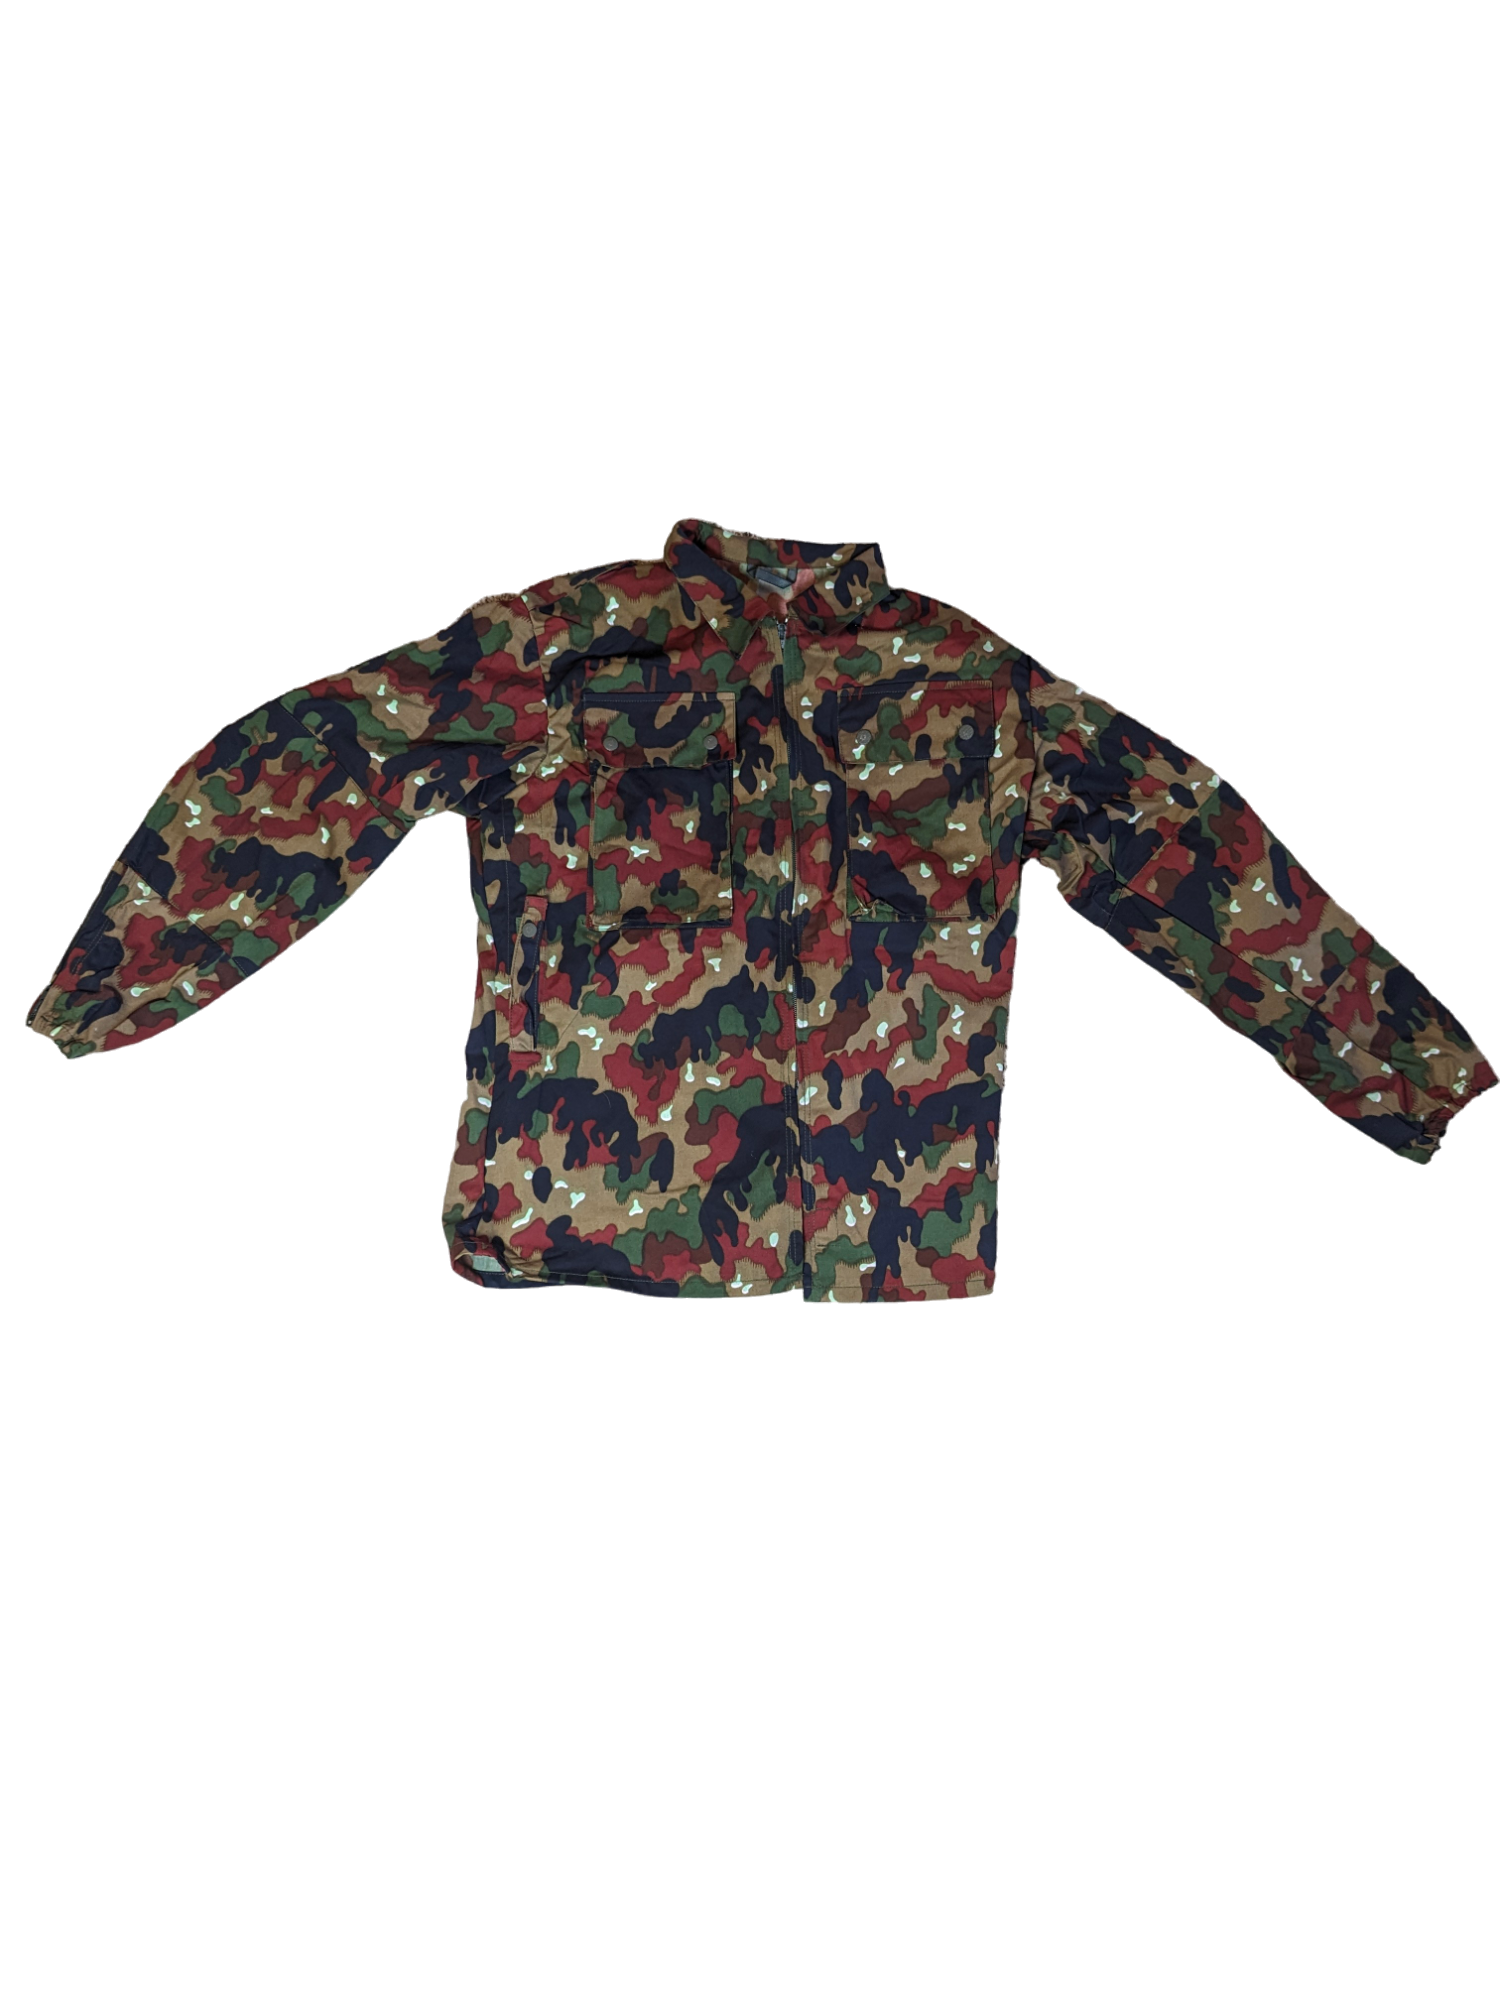 A durable, long-sleeve **Swiss M83 Camo Field Shirt** by **Six Gun Surplus**, featuring shades of green, brown, and black with functional front pockets on each side of the chest. The shirt is displayed against a solid black background.